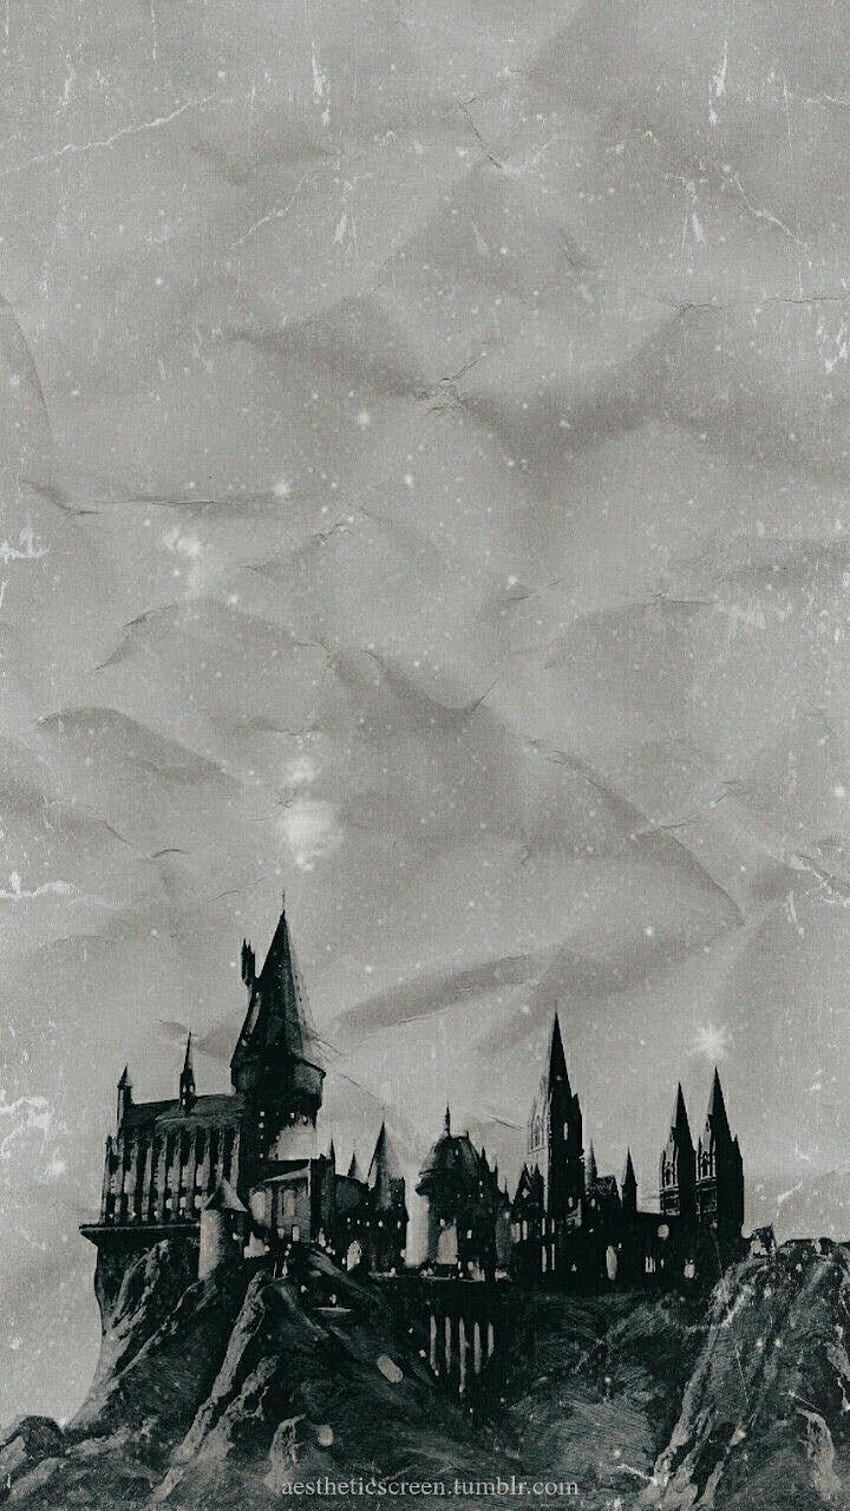 Hogwarts castle on a hill with snow falling - Harry Potter, Hogwarts